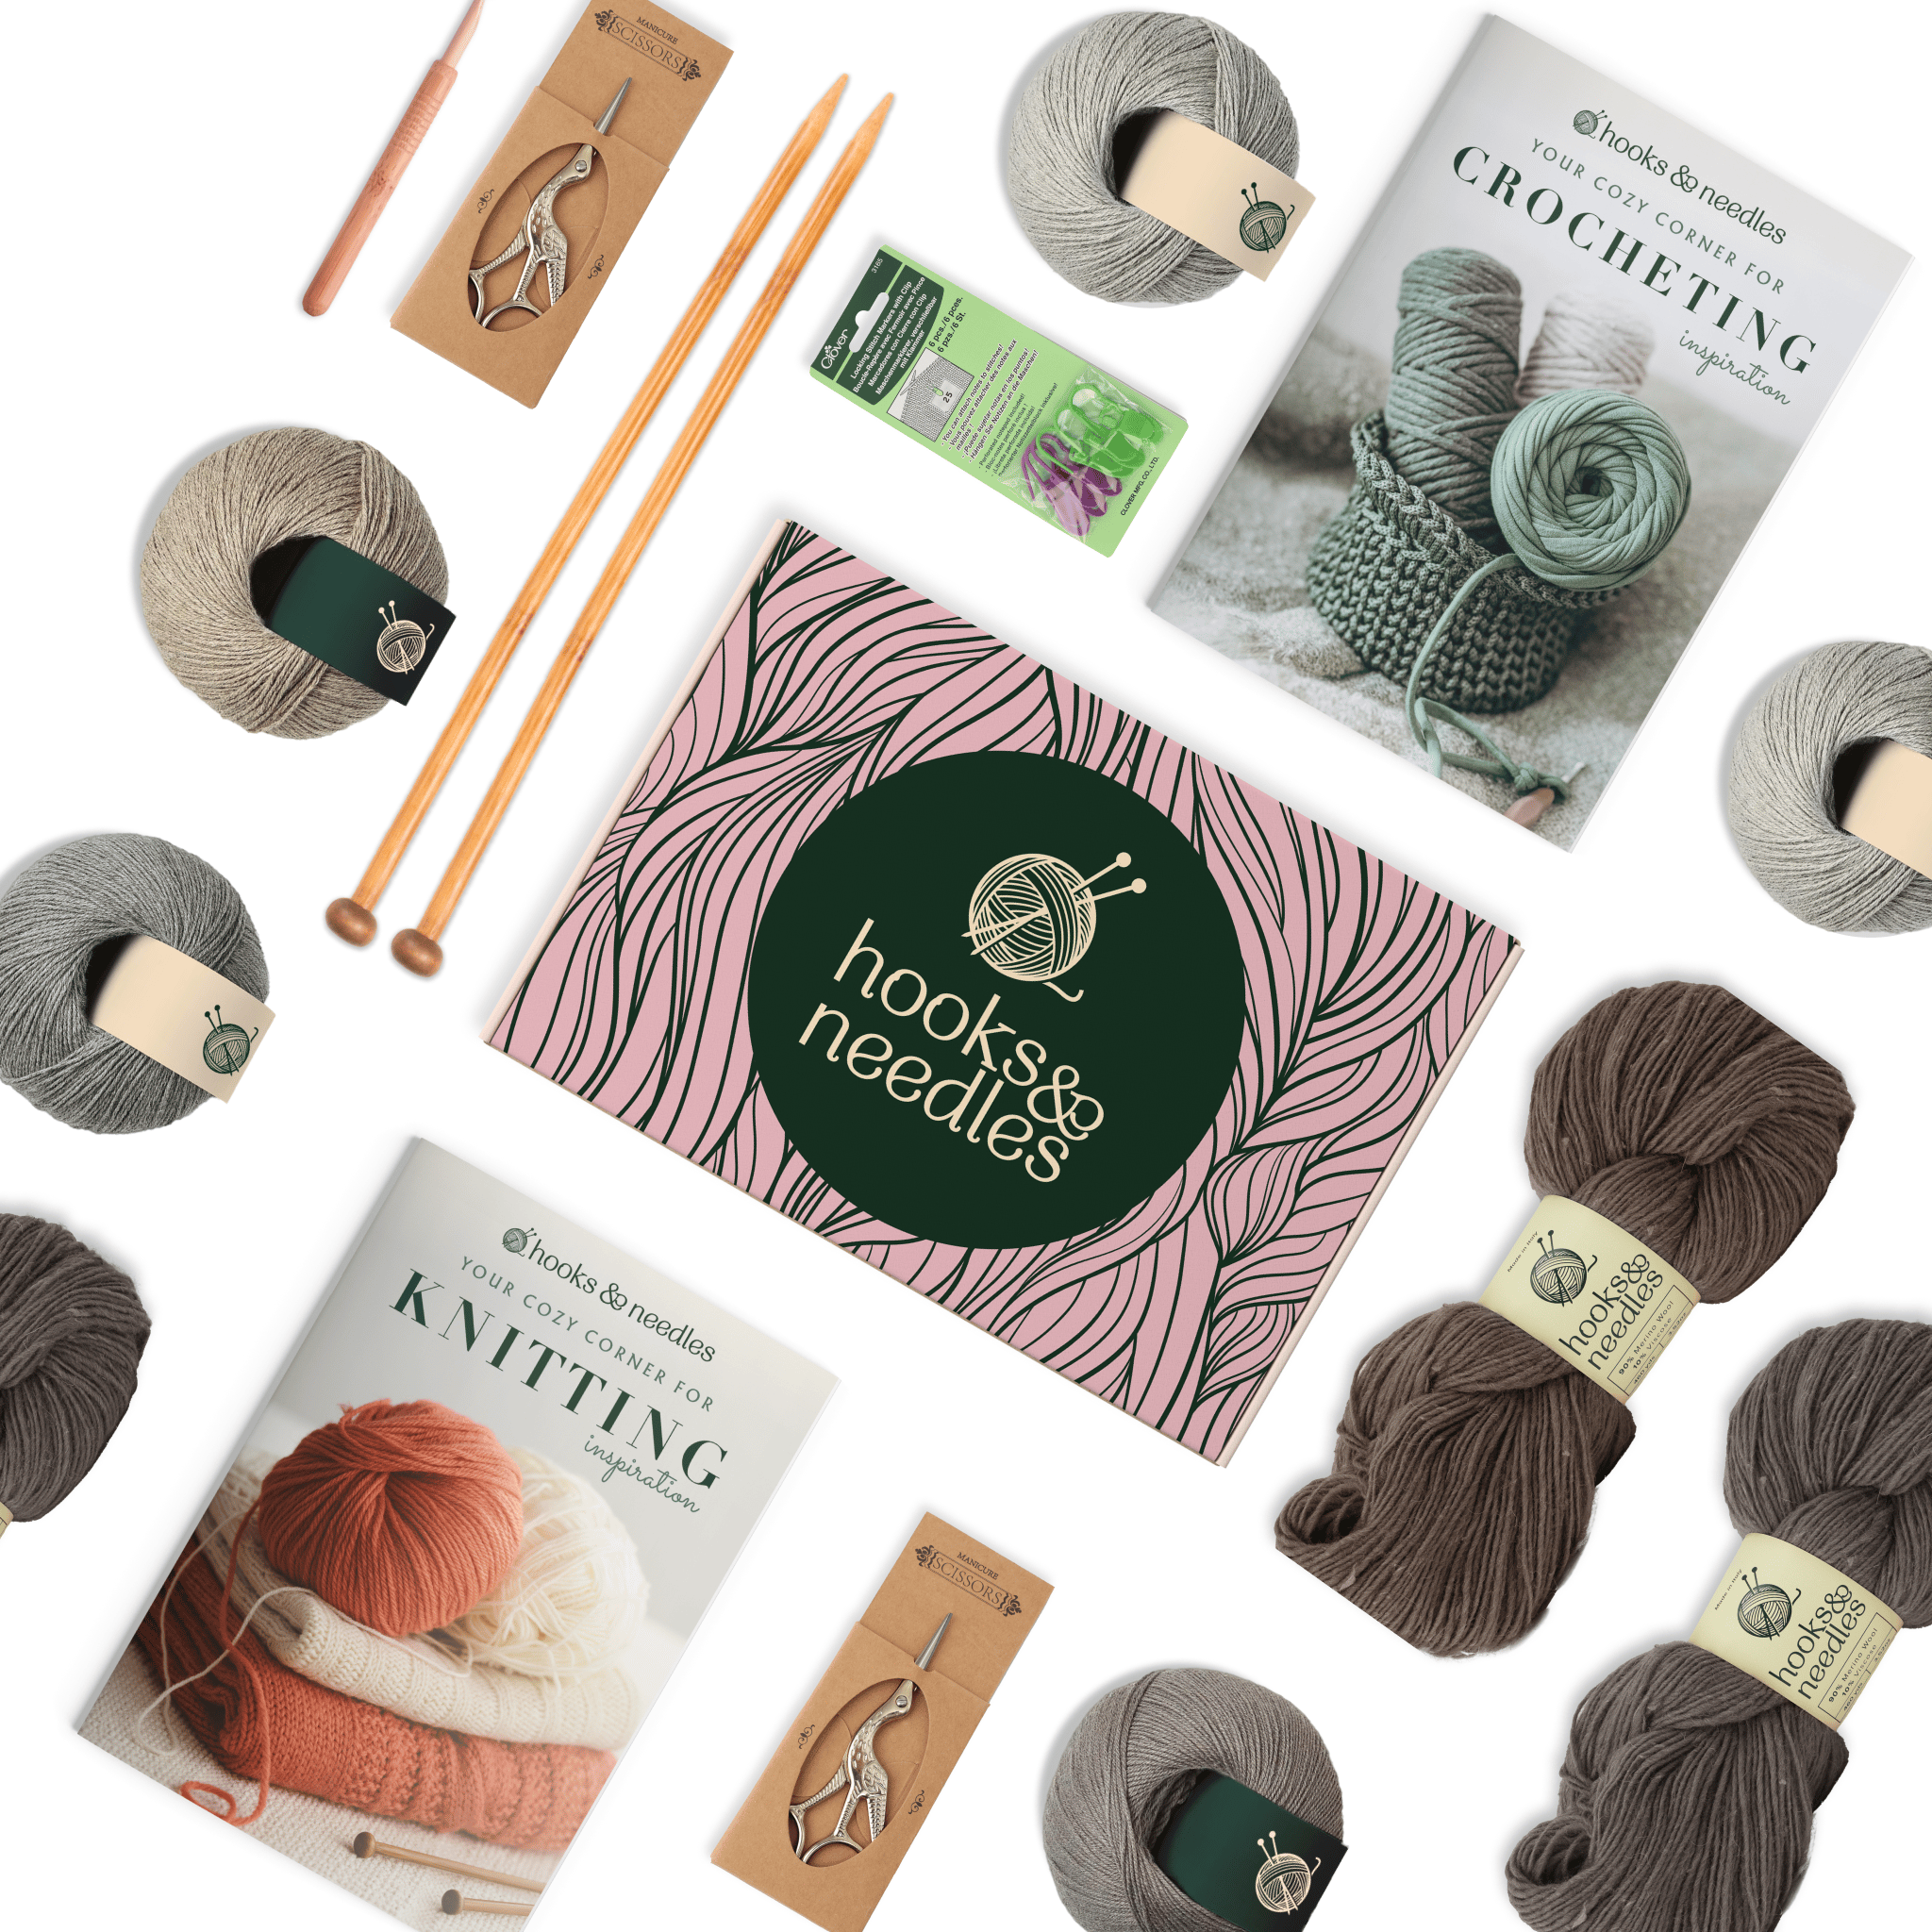 Flat lay of yarn balls, [6-Month-Prepaid] Hooks & Needles Subscription Box #3 and instructional books on knitting and crochet.